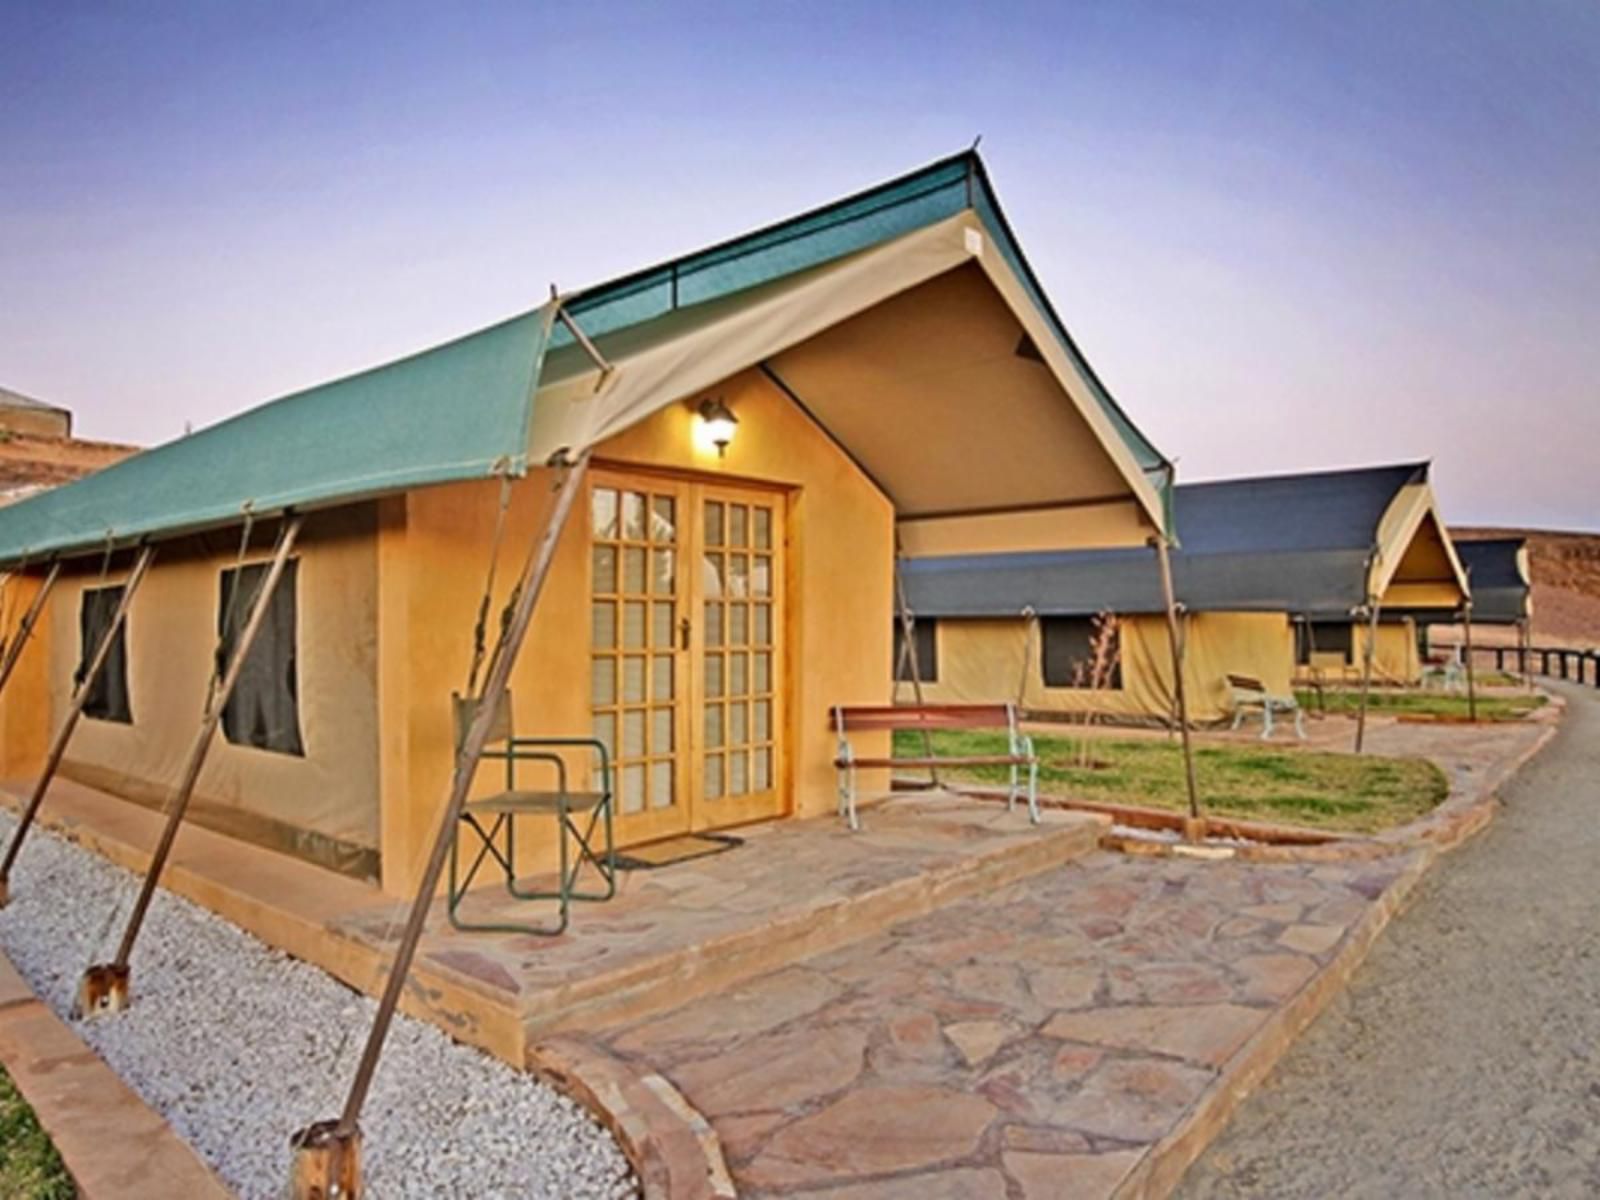 Frontier River Resort Vioolsdrift Northern Cape South Africa Complementary Colors